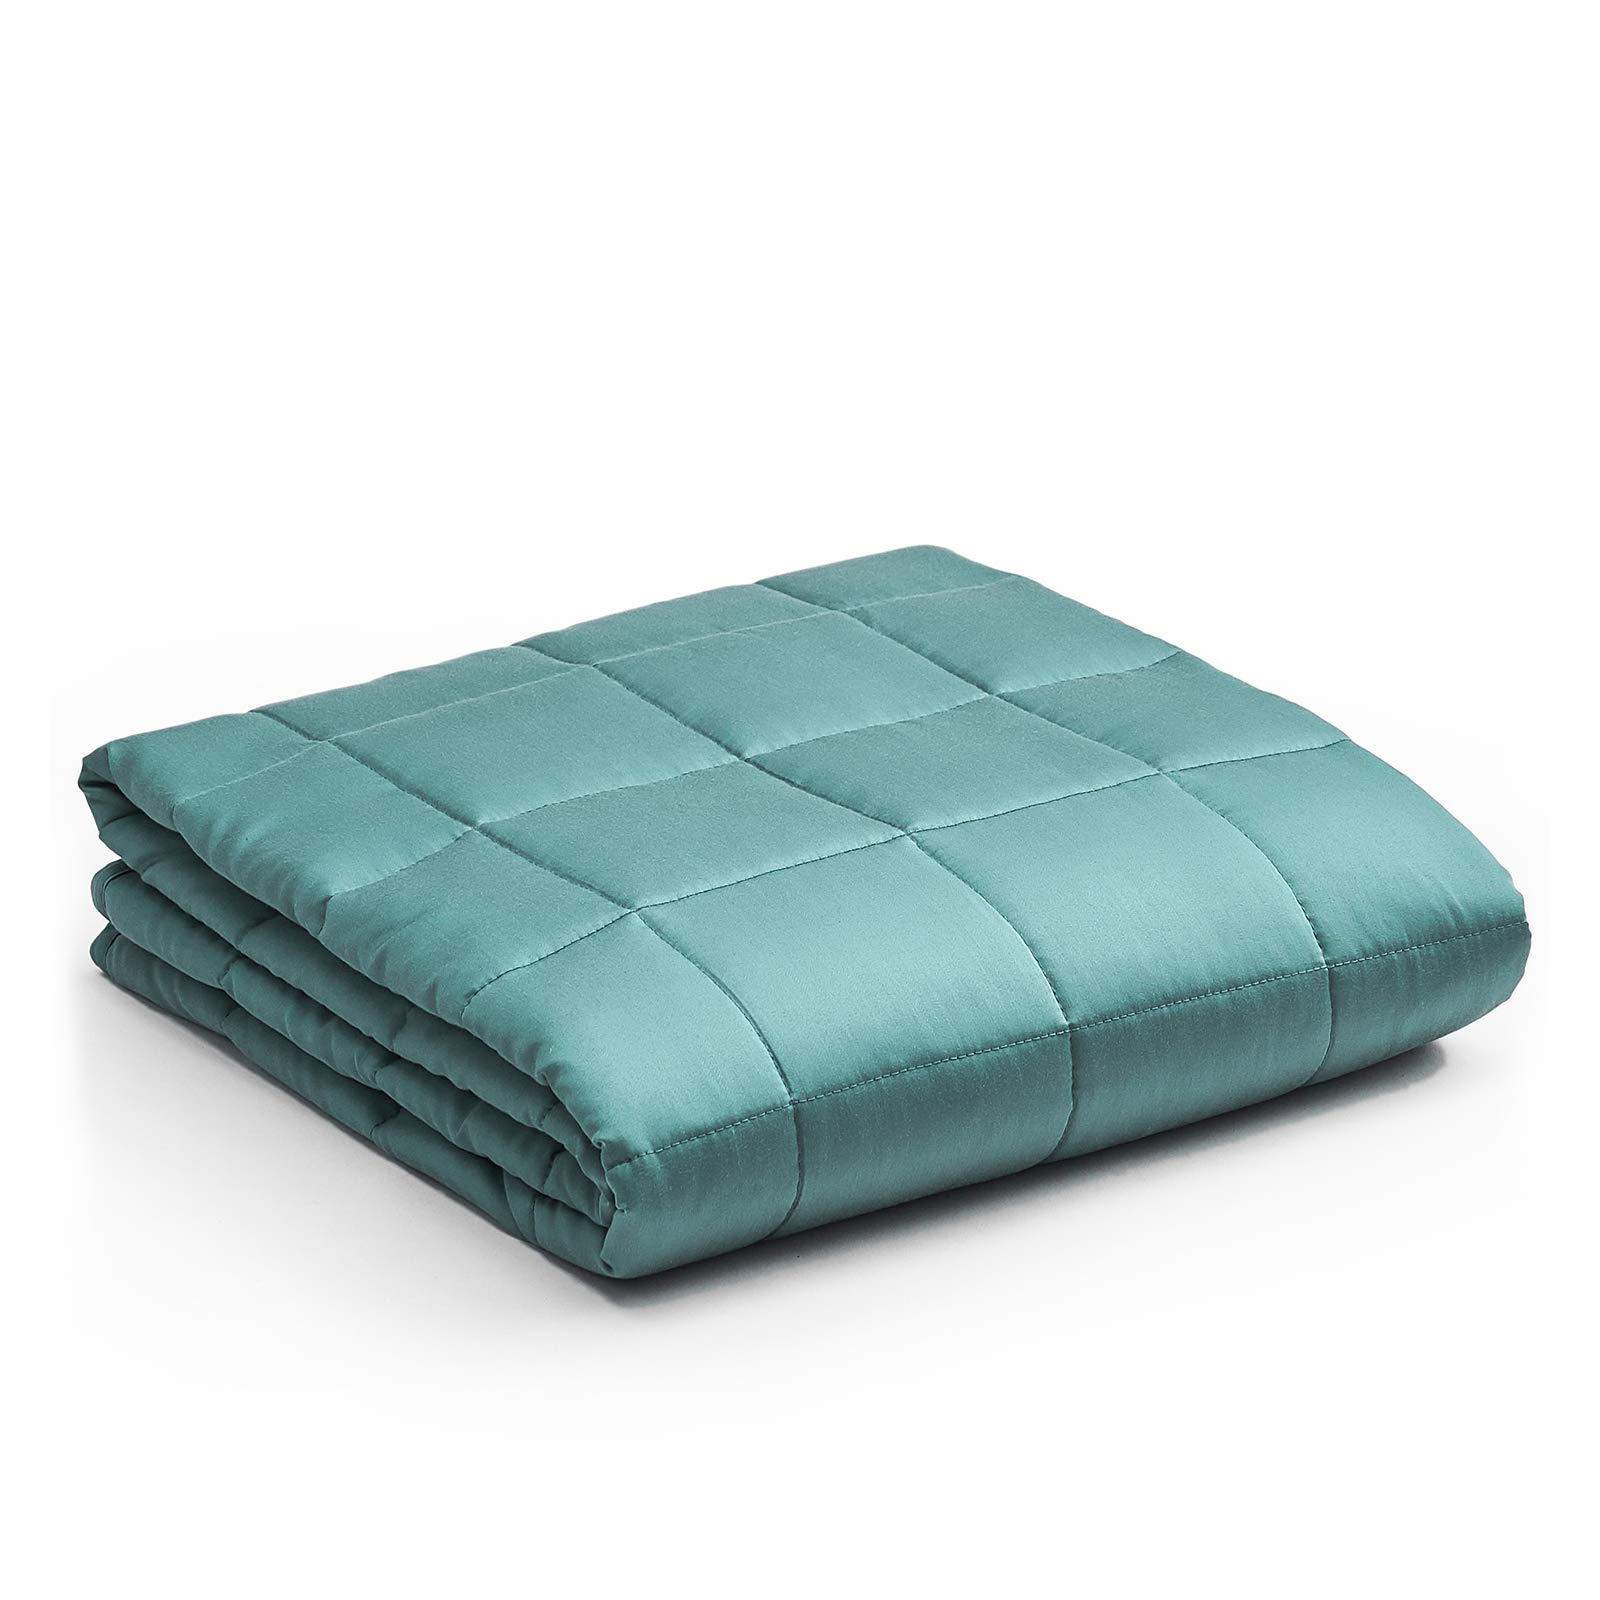 Book Cover YnM Kids Bamboo Weighted Blanket — 100% Cooling Bamboo Viscose Oeko-Tex Certified Material with Premium Glass Beads (Sea Grass, 41''x60'' 7lbs), Suit for One Person(~60lb) Use on Twin Bed Bamboo 41 in x 60 in 7 lb Sea Grass丨bamboo丨orig